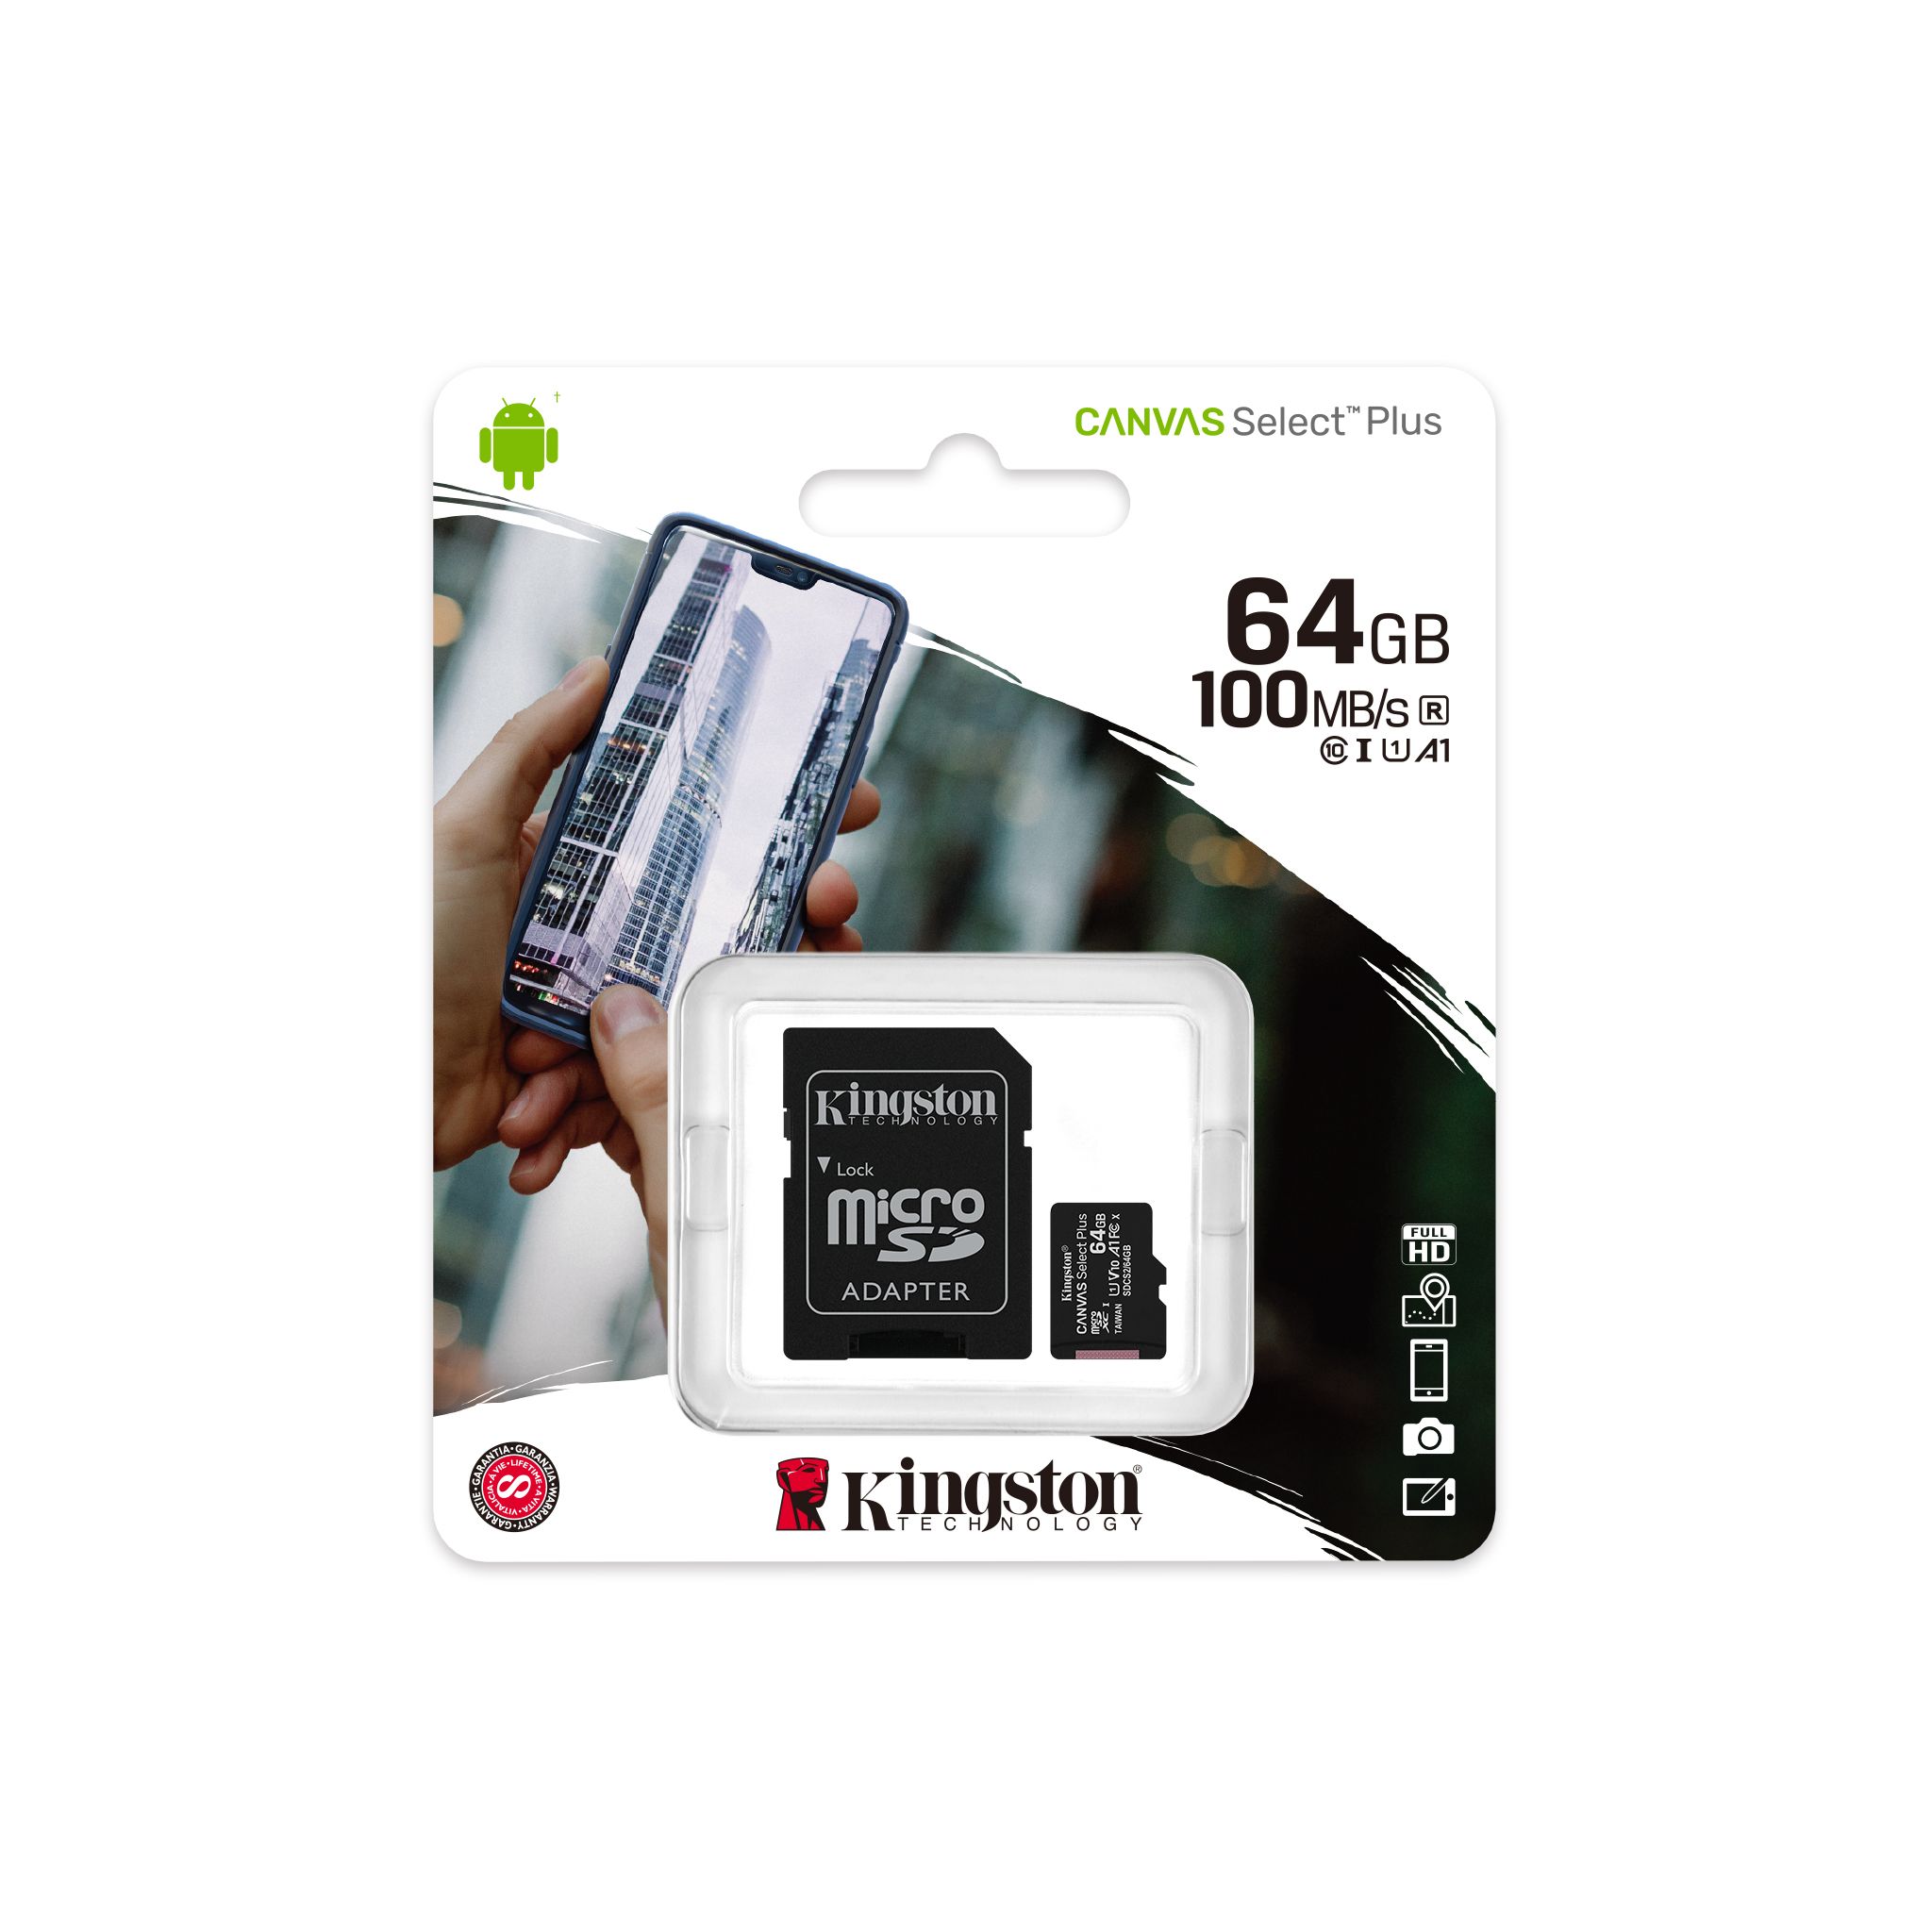 Kingston 100MB/s Flash Memory Card with Adapter (64GB Class 10)